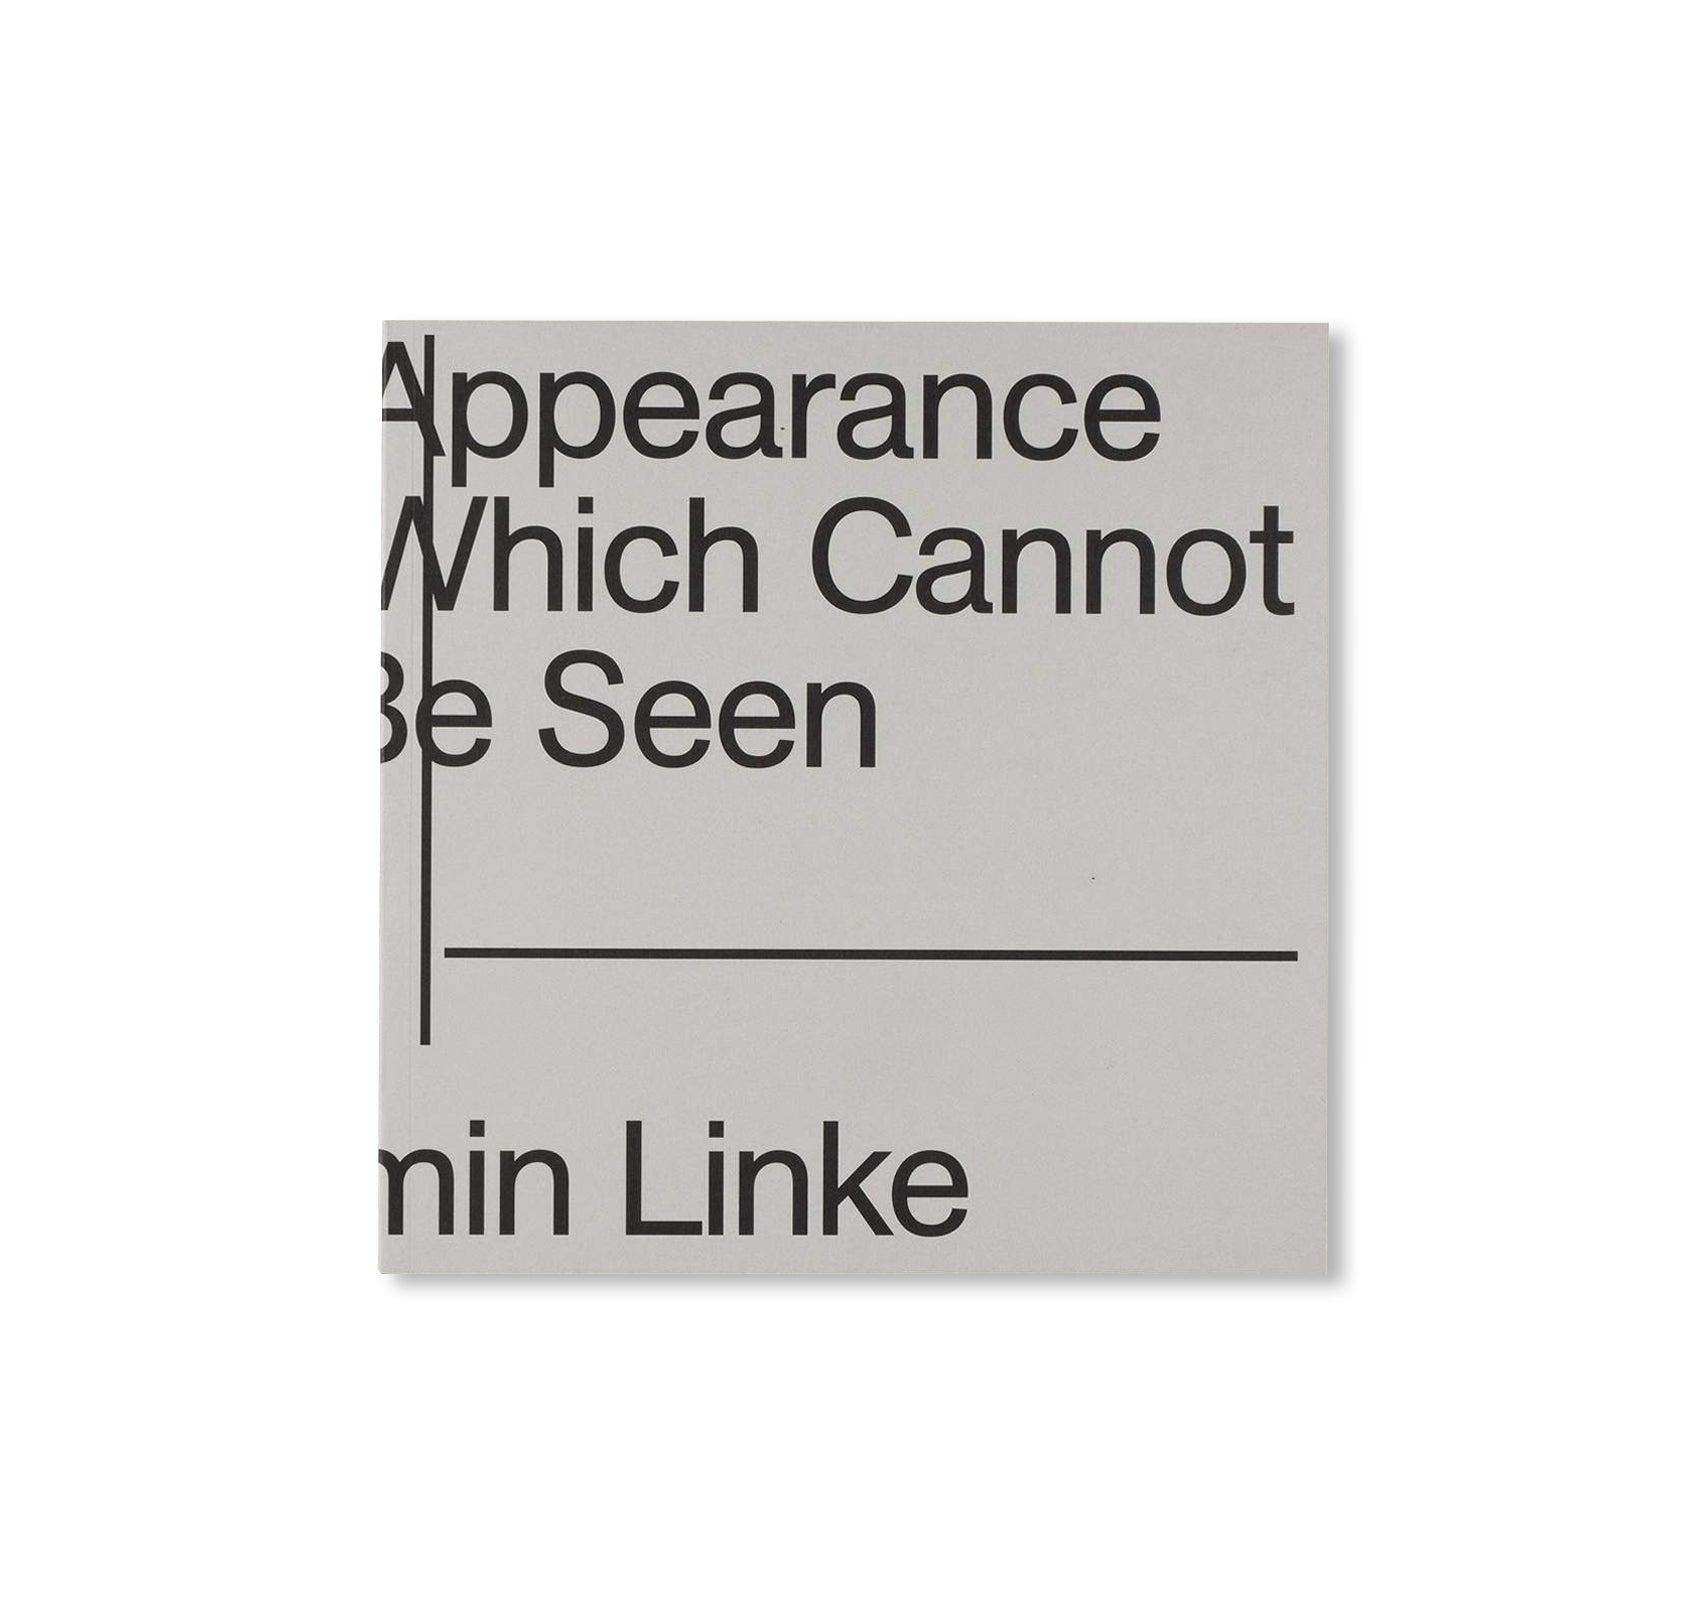 THE APPEARANCE OF THAT WHICH CANNOT BE SEEN by Armin Linke